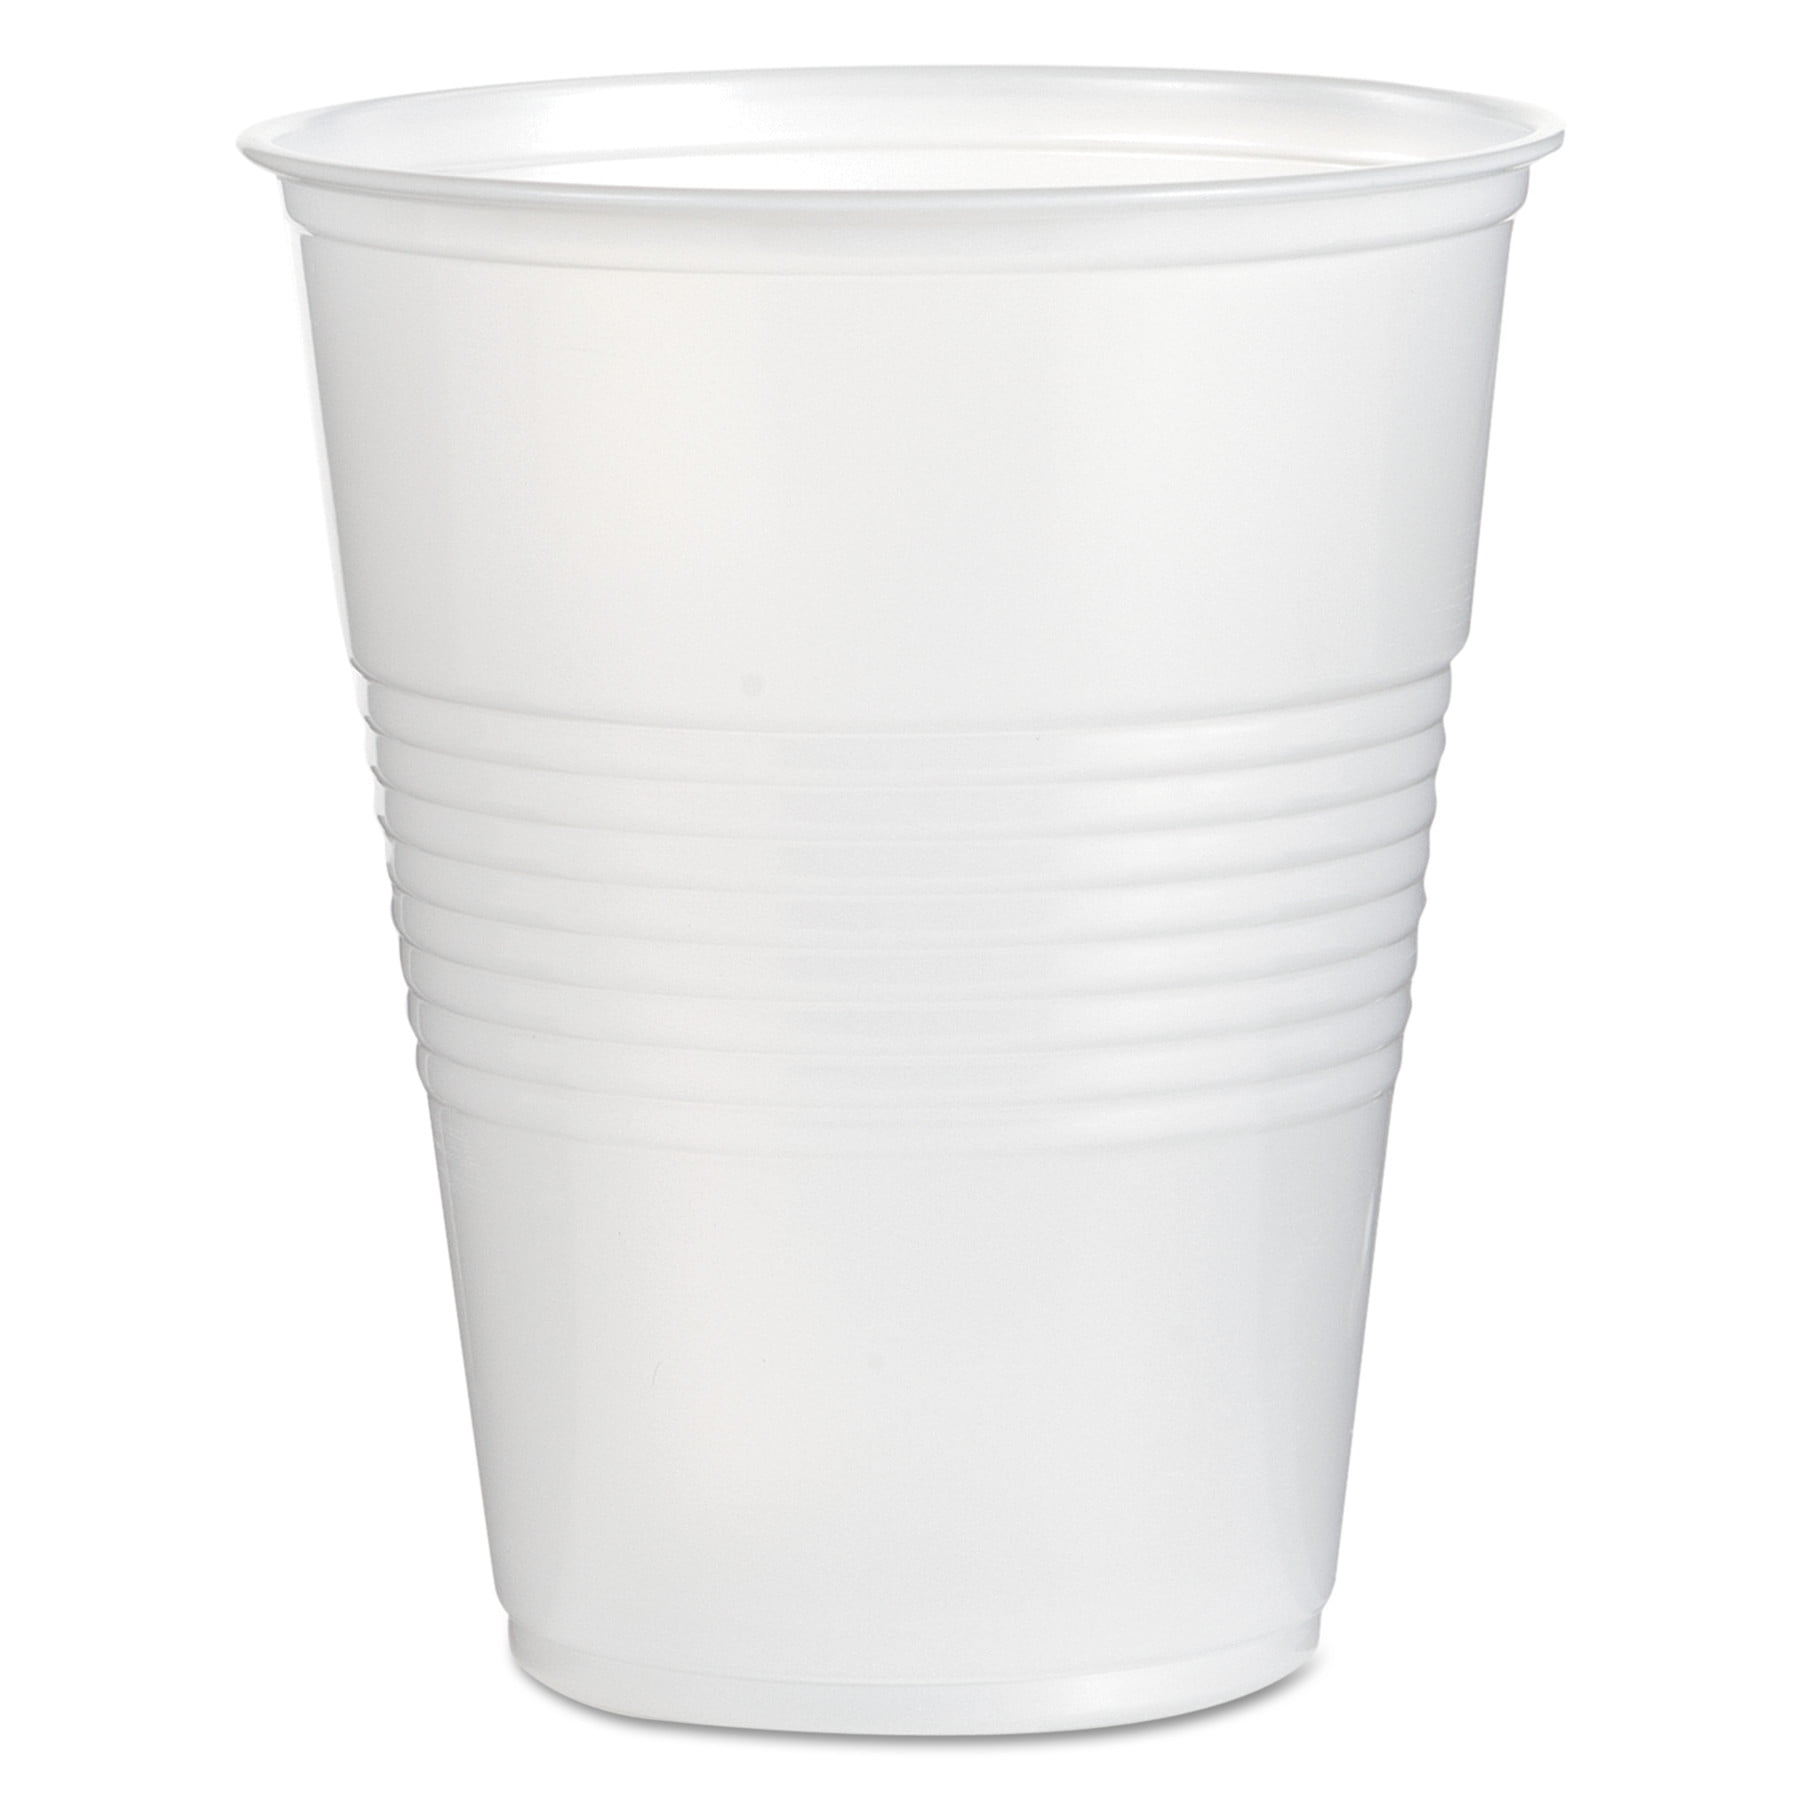 Premium Quality Shatter Resistant Party Water Cups 300 Value Pack 12 oz Plastic Cups Disposable Clear Translucent Disposable Cold Plastic Cups 